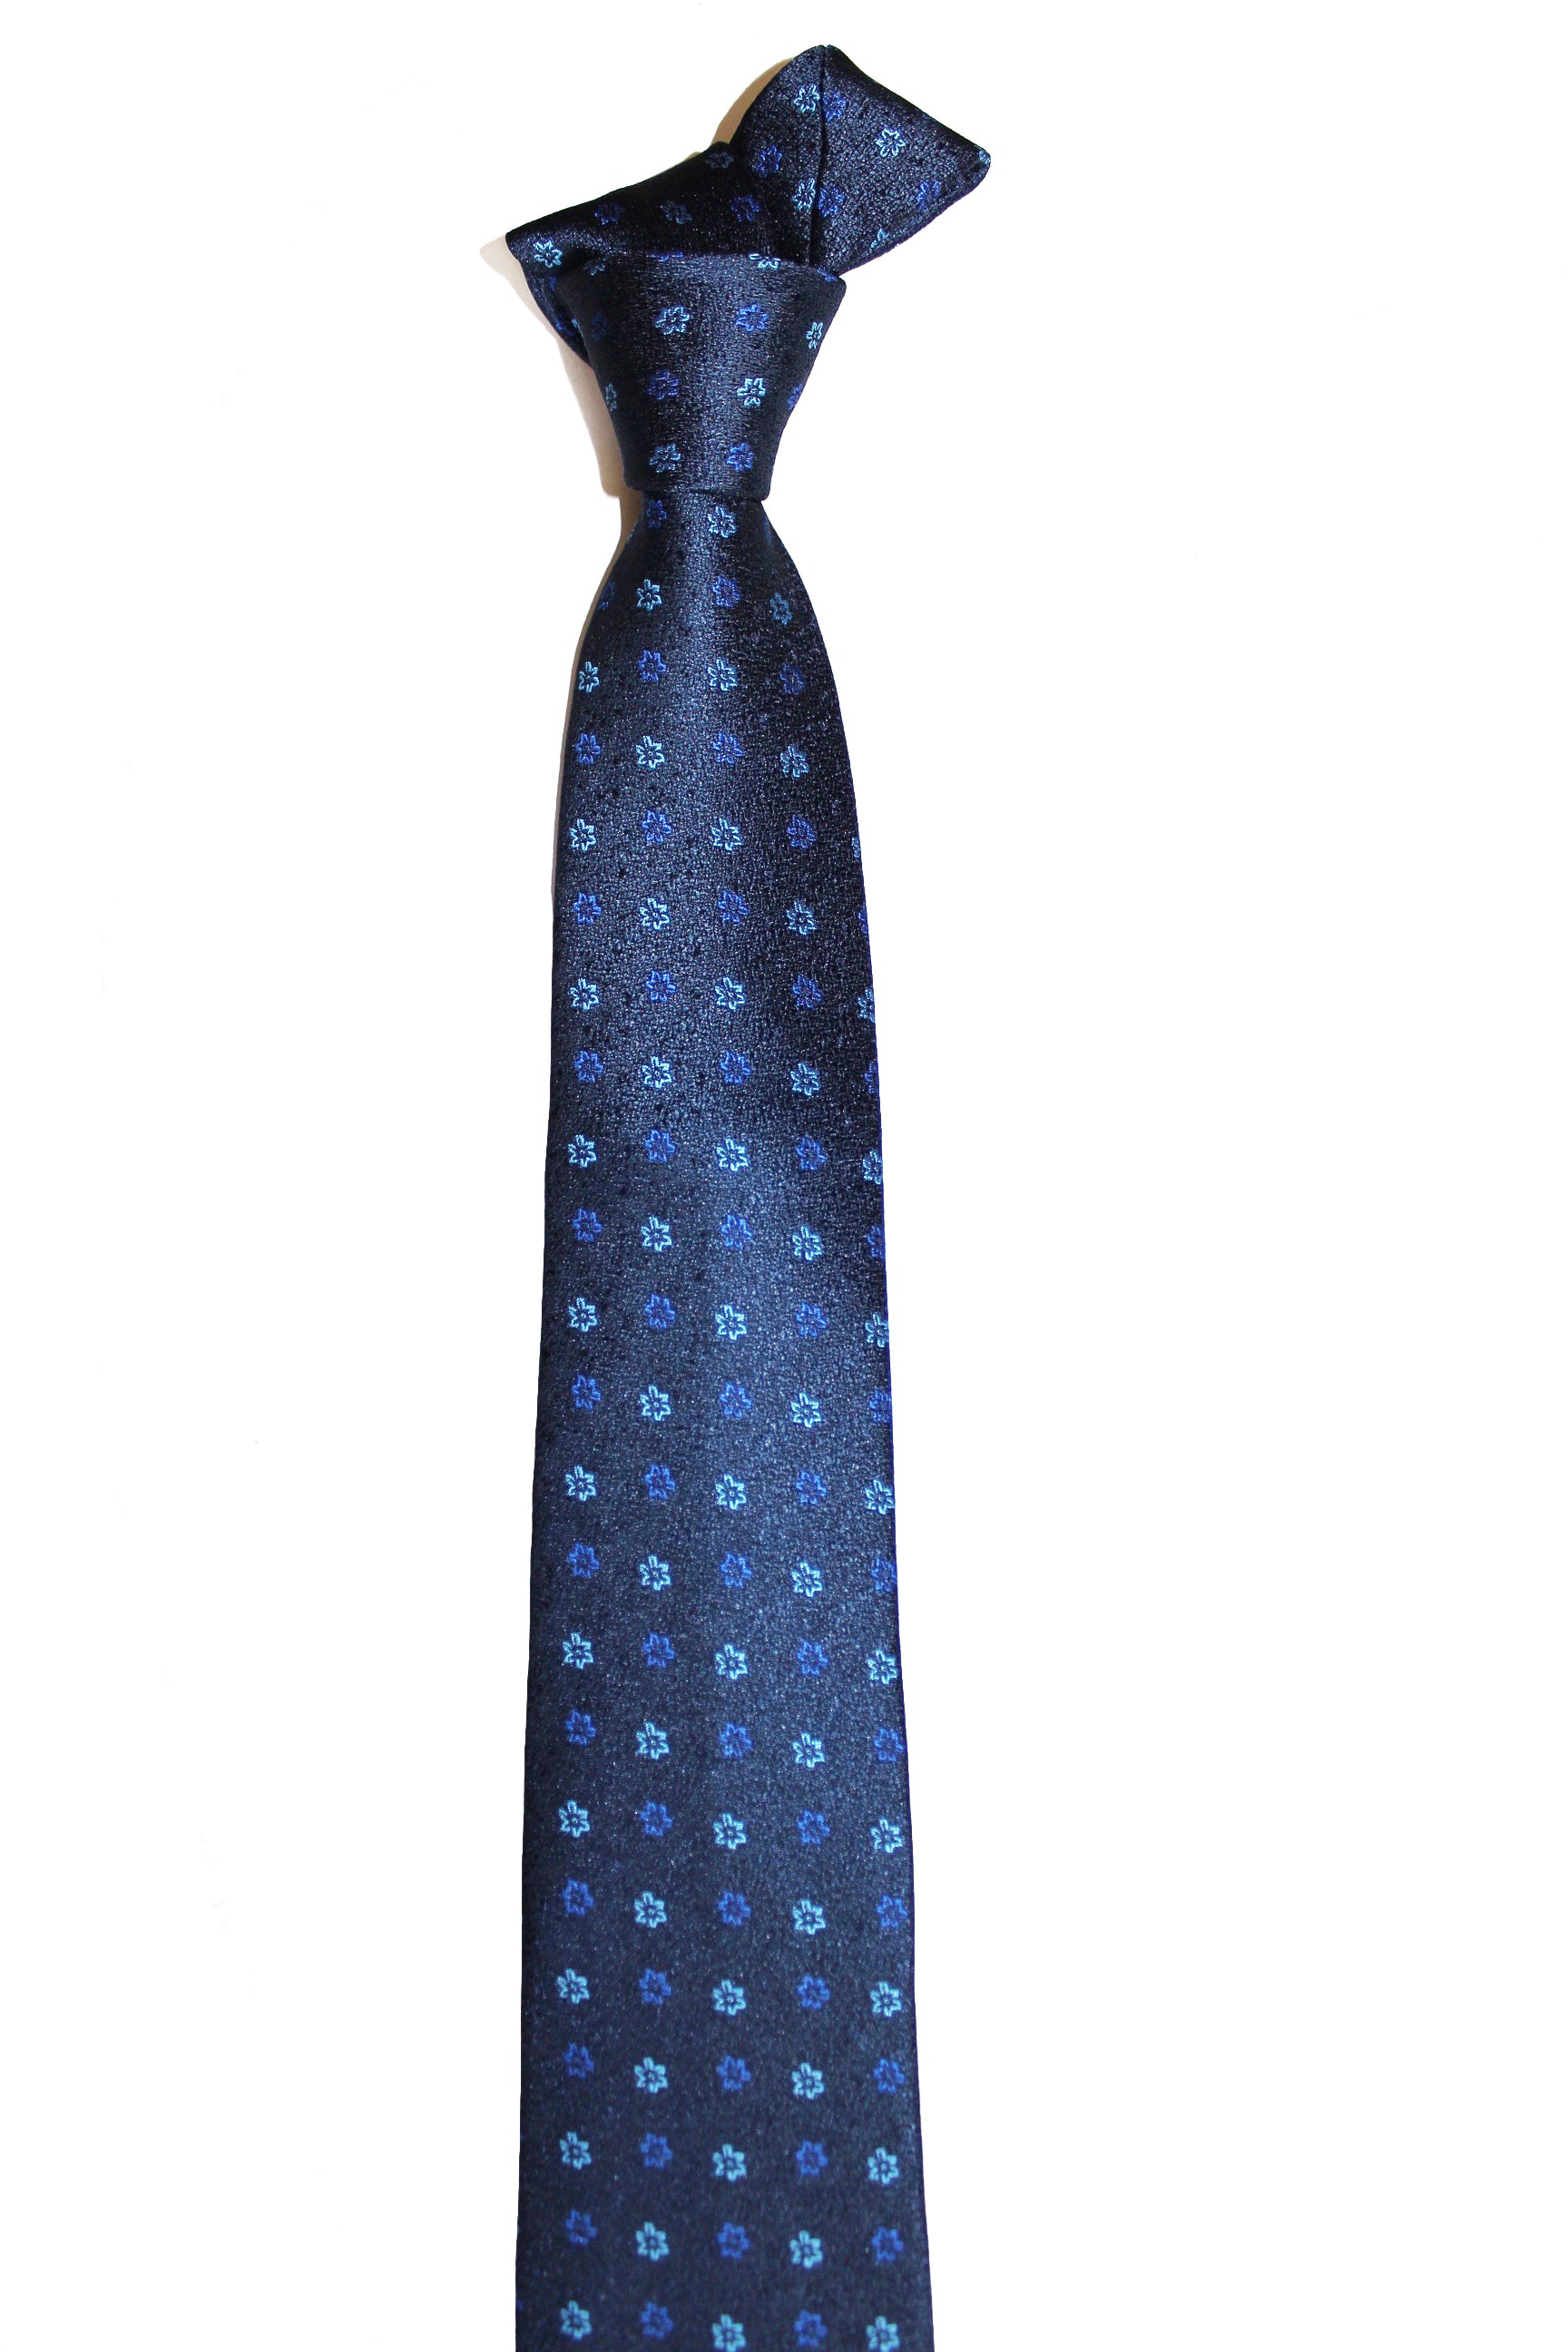 Ying Cai Norrian Tie /Blue 2